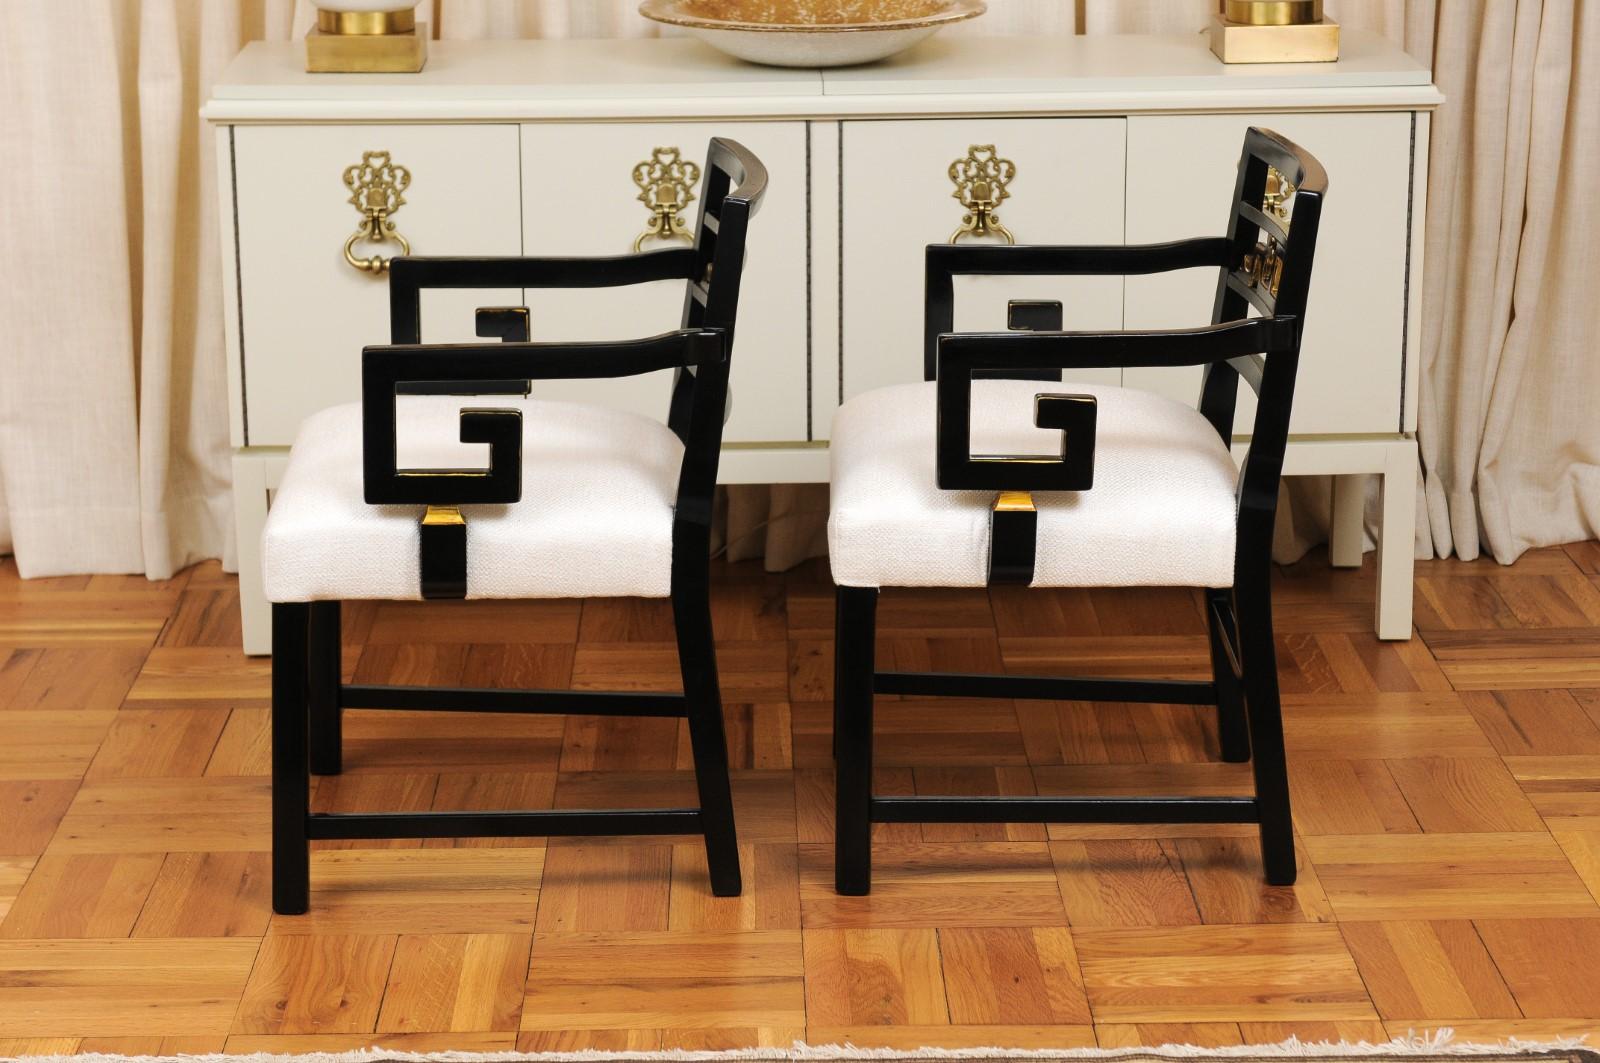 Exquisite Set of 12 Chinoiserie Greek Key Armchairs by Baker, circa 1960 For Sale 8